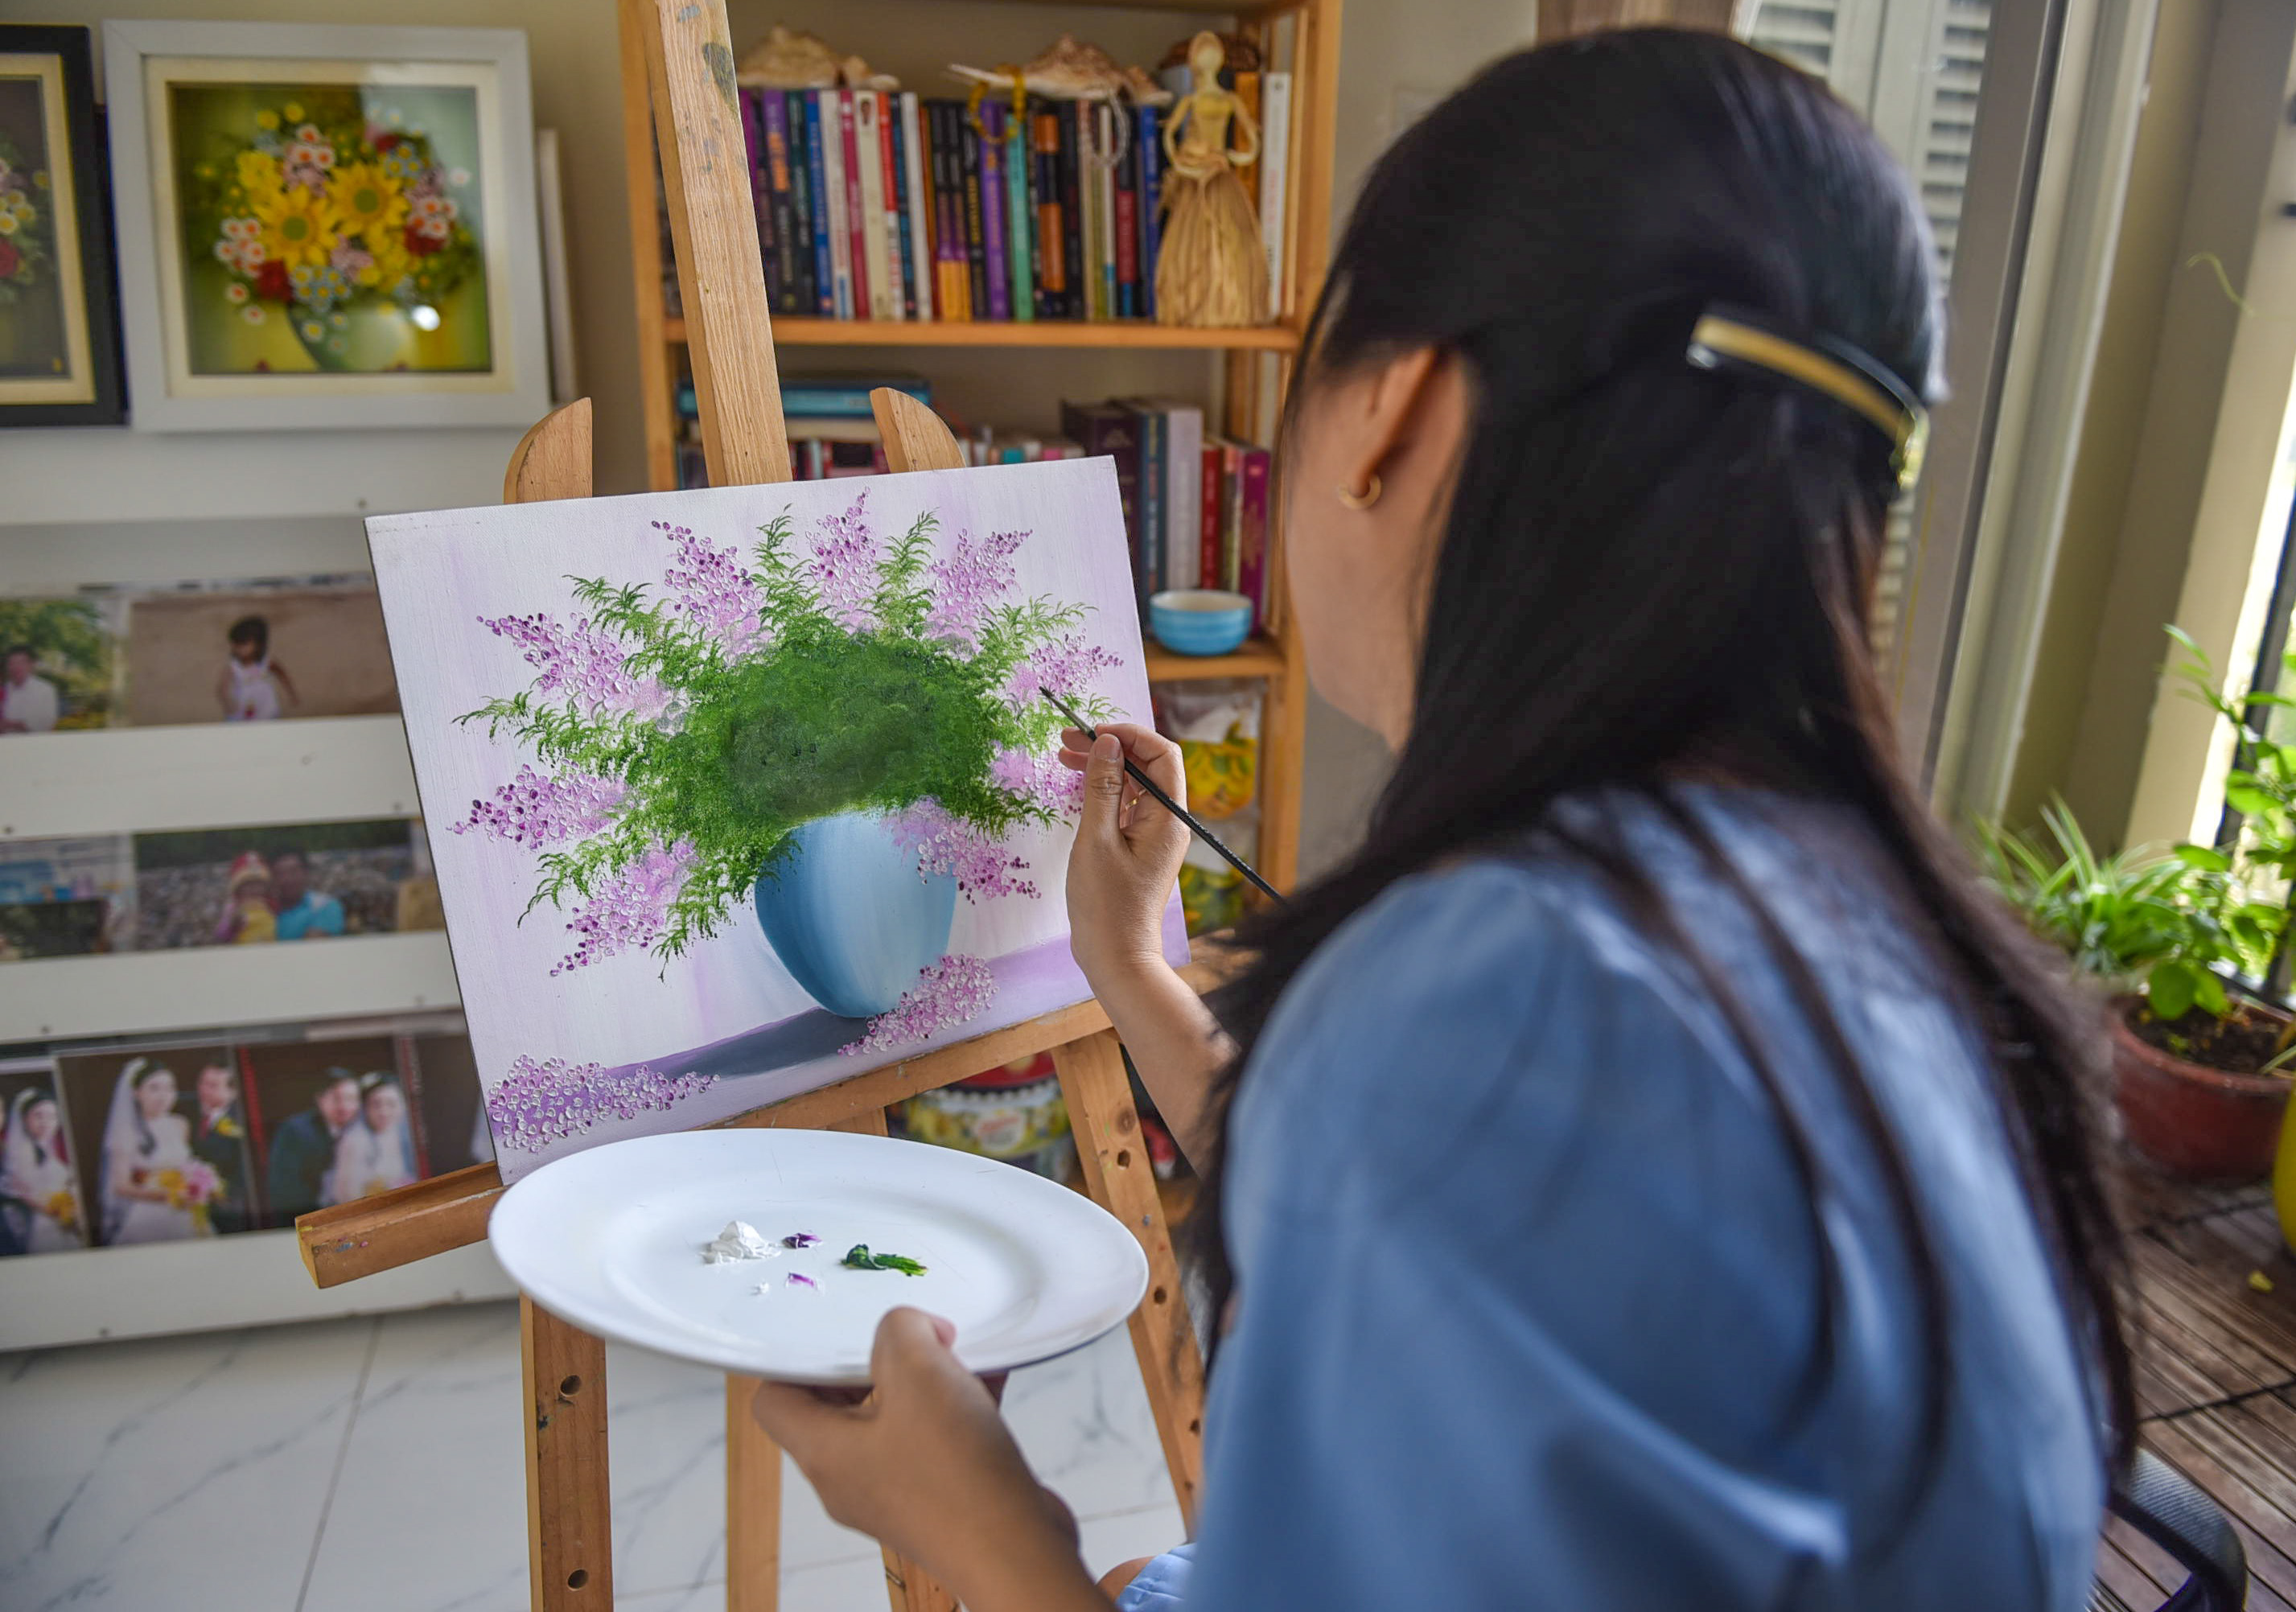 Pham Thi Giang Sinh paints a vase of flowers before attaching clay flowers to the piece. Photo: Ngoc Phuong / Tuoi Tre News